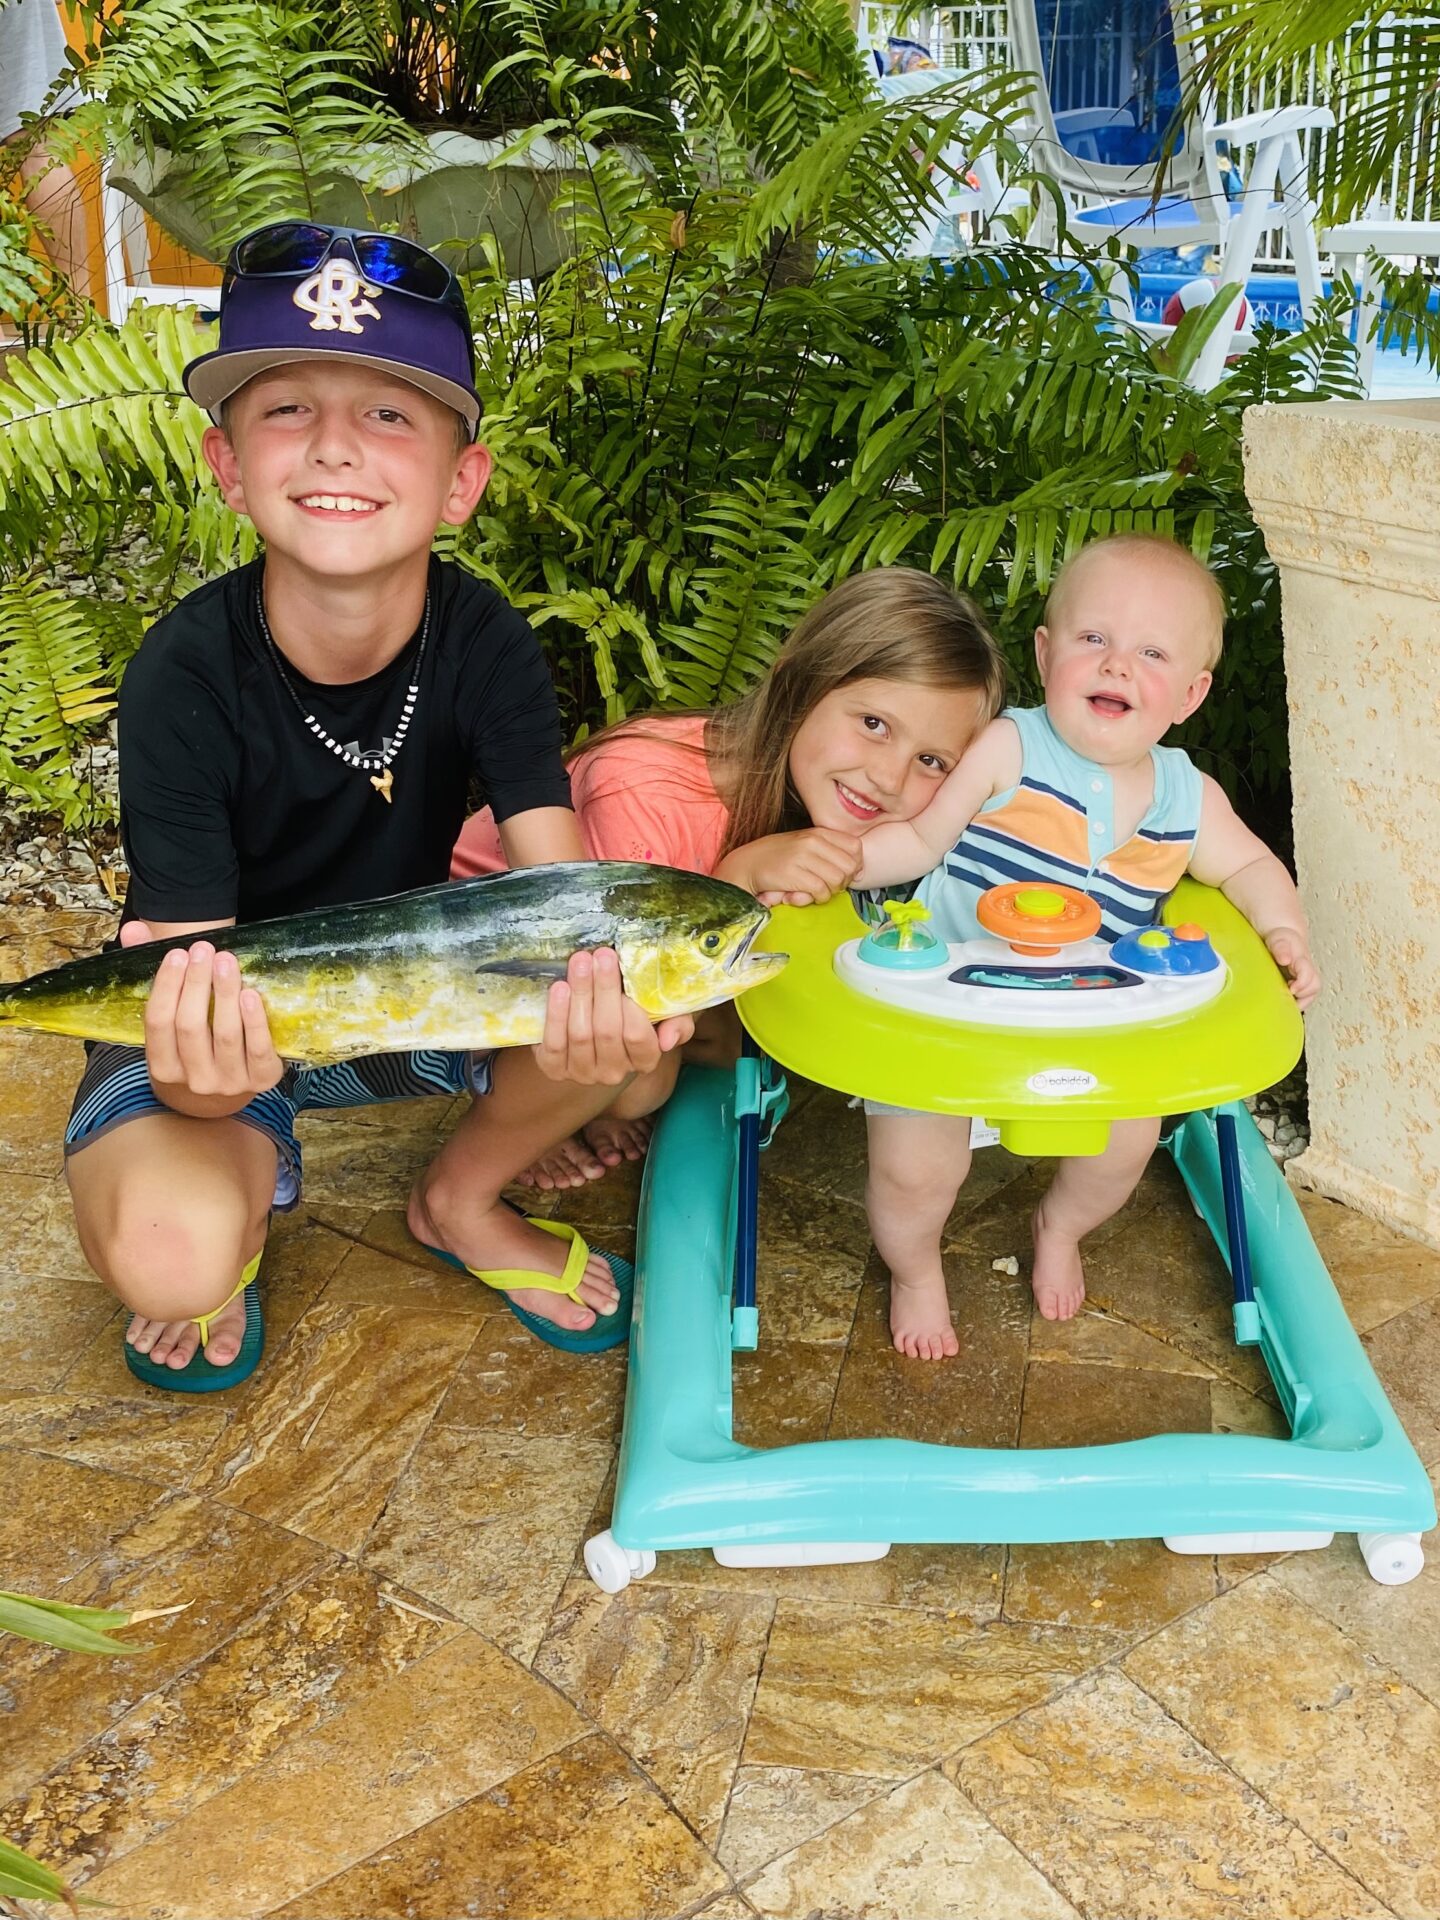 A boy holding a fish with two children